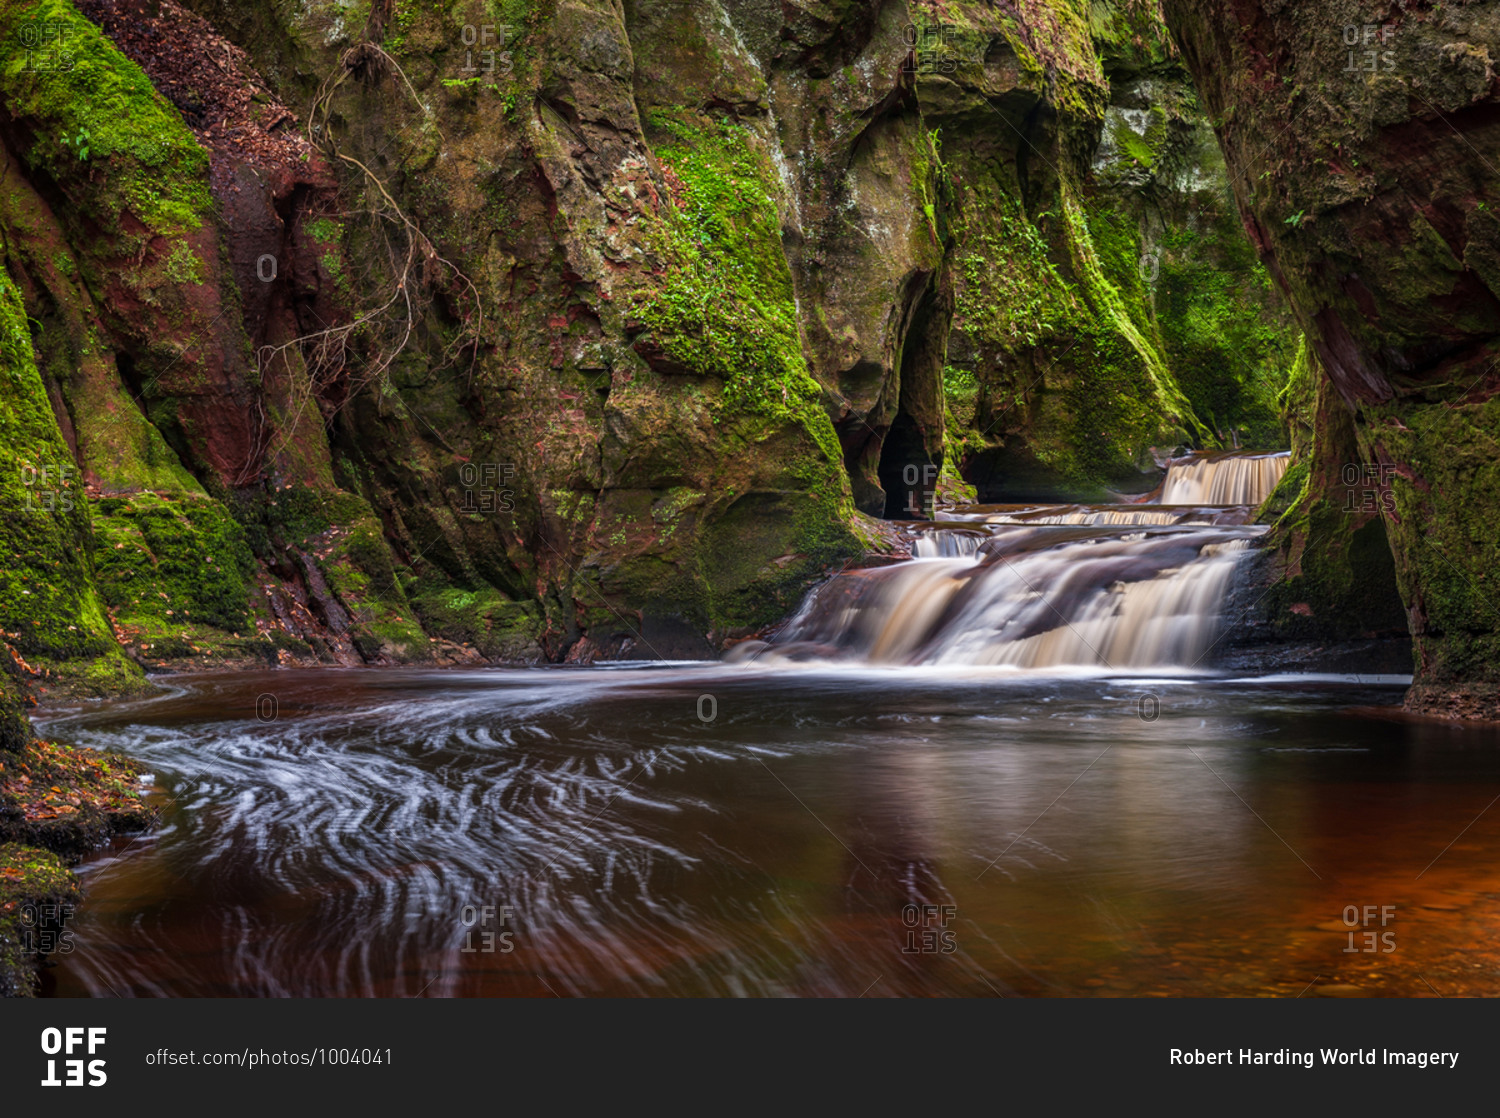 The gorge at Finnich Glen, known as Devils Pulpit near Killearn, Stirling, Scotland, United Kingdom, Europe